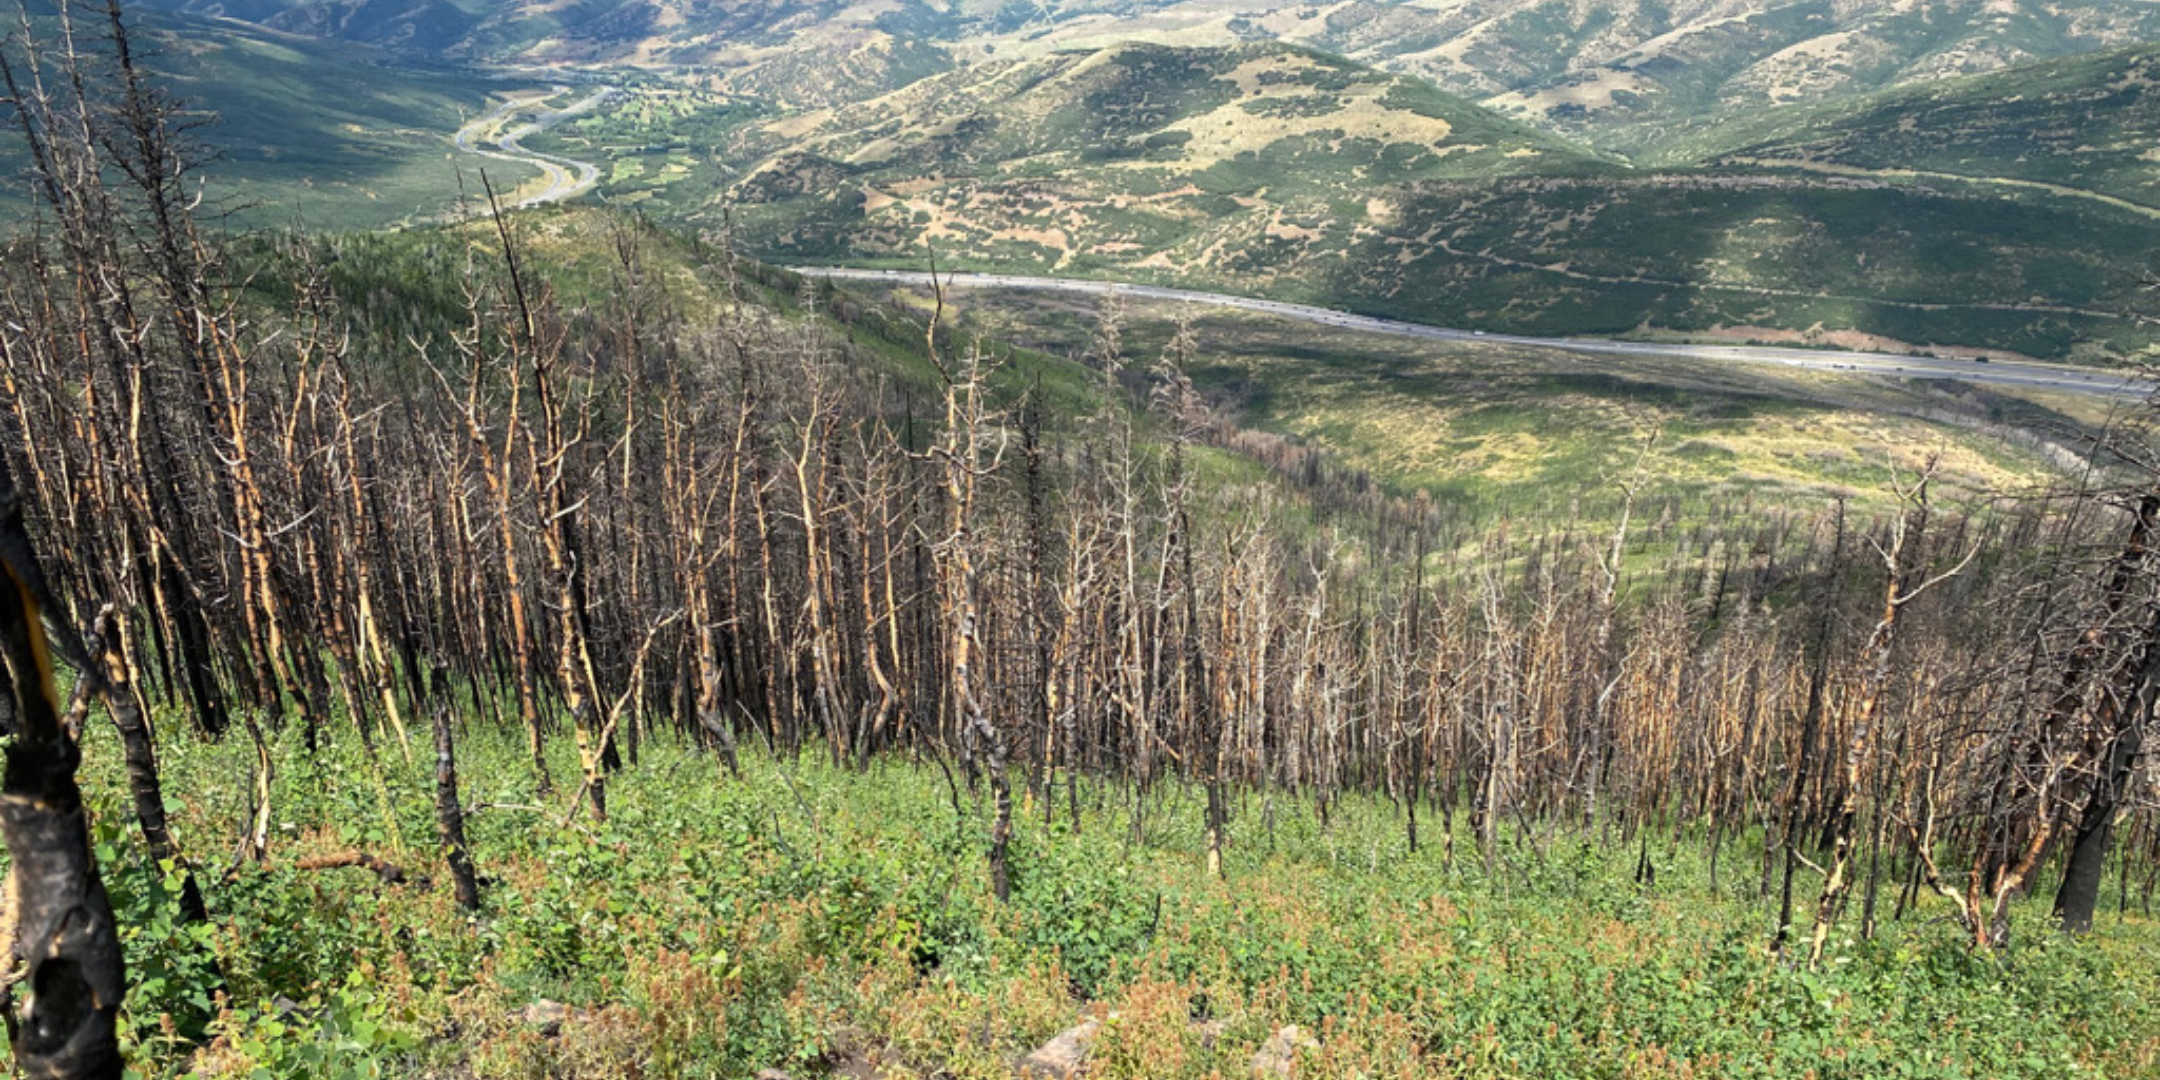 Burnt trees overlooking Parley's Canyon and I-80